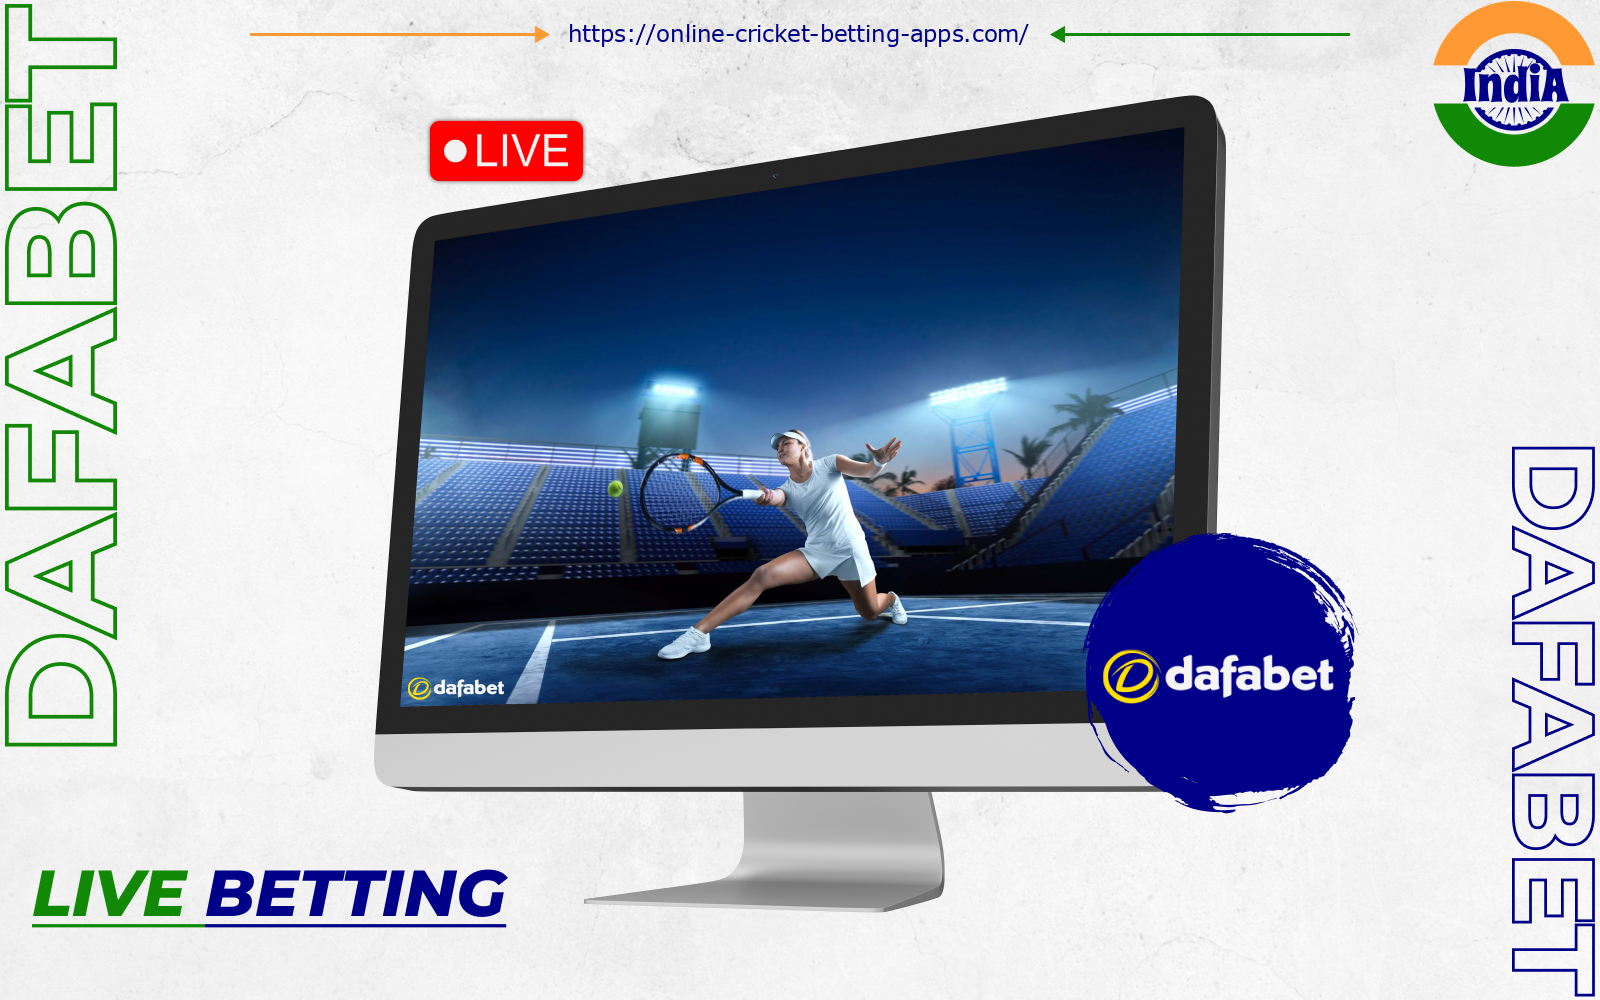 The Dafabet app has all the features to make Indian users comfortable with live betting